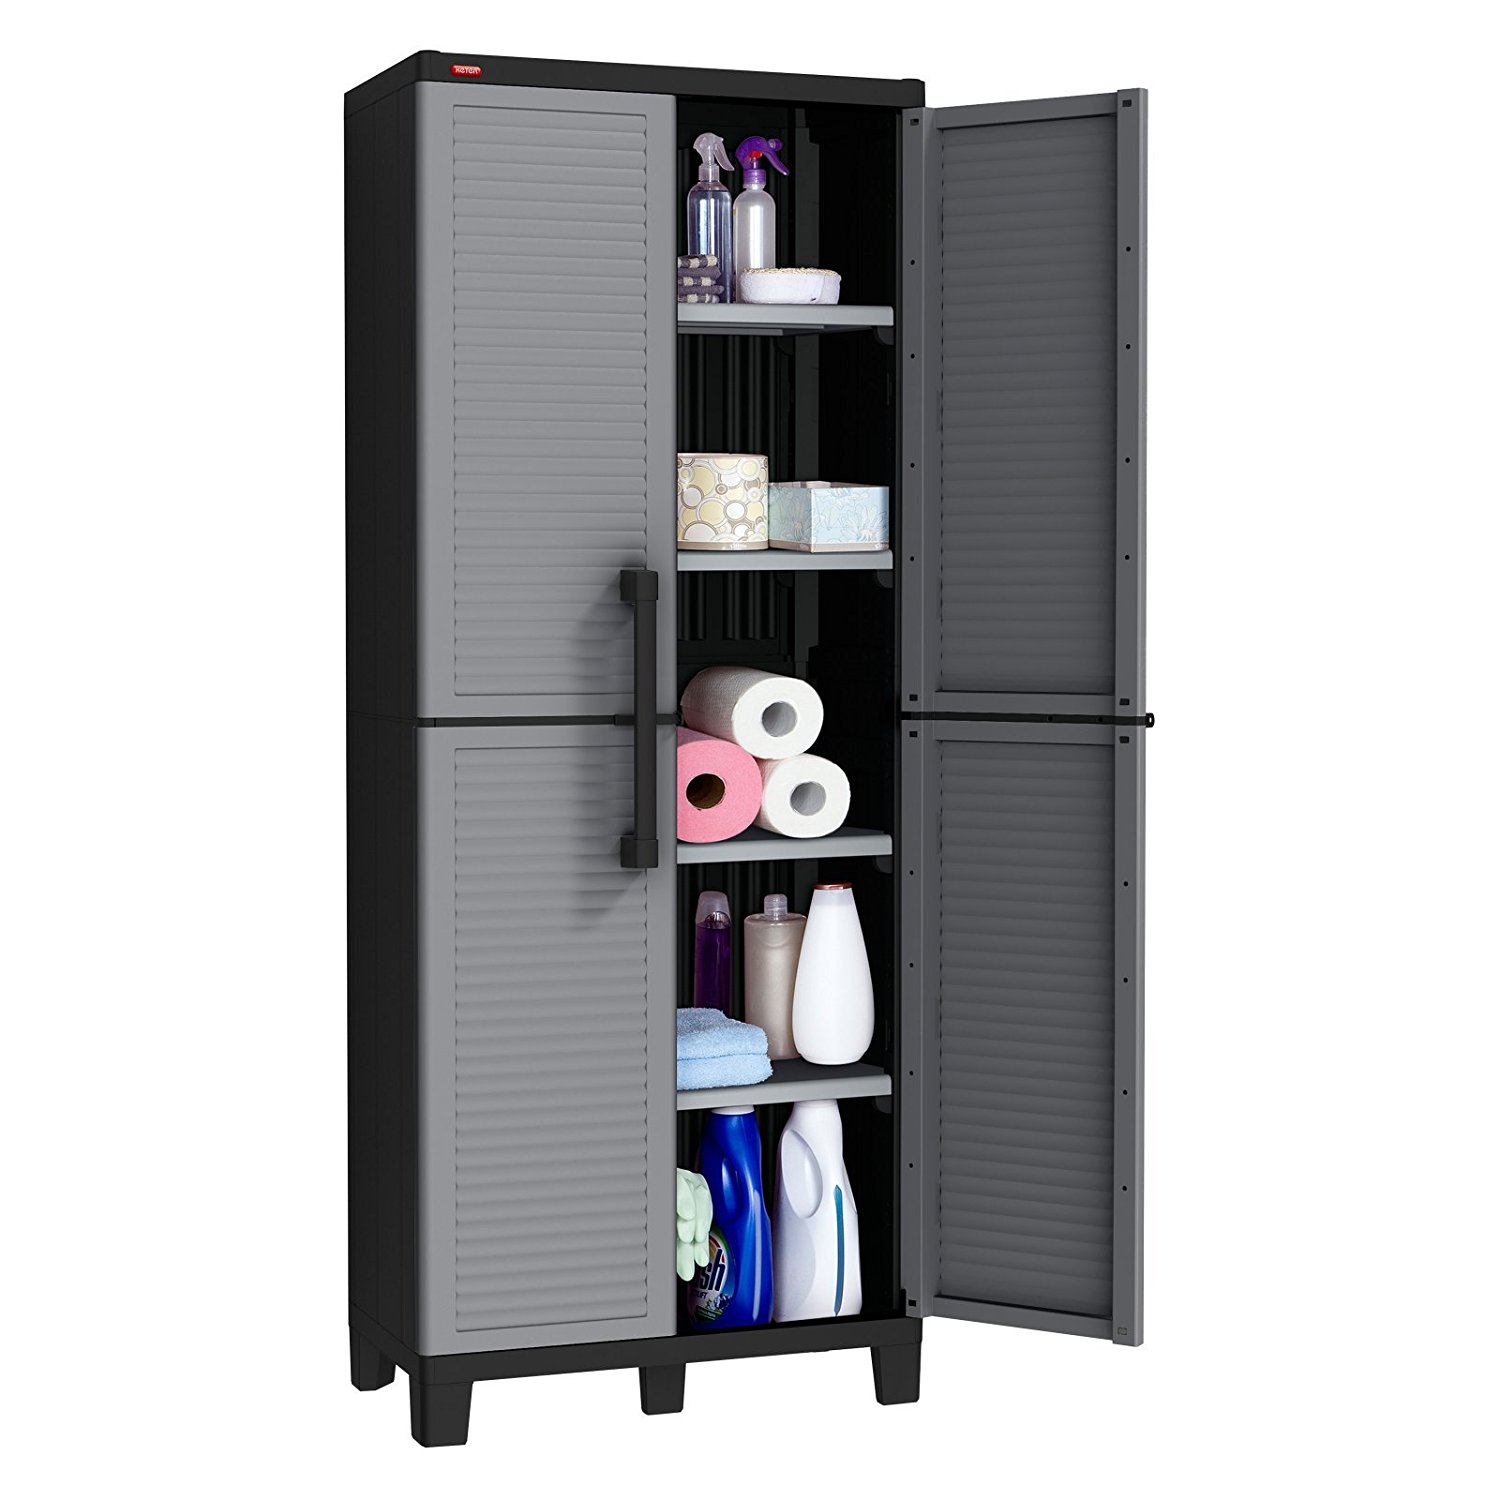 Keter Space Winner Tall Metro Storage Utility Cabinet Indoor / Outdoor Garage or Home Storage with Adjustable Shelves